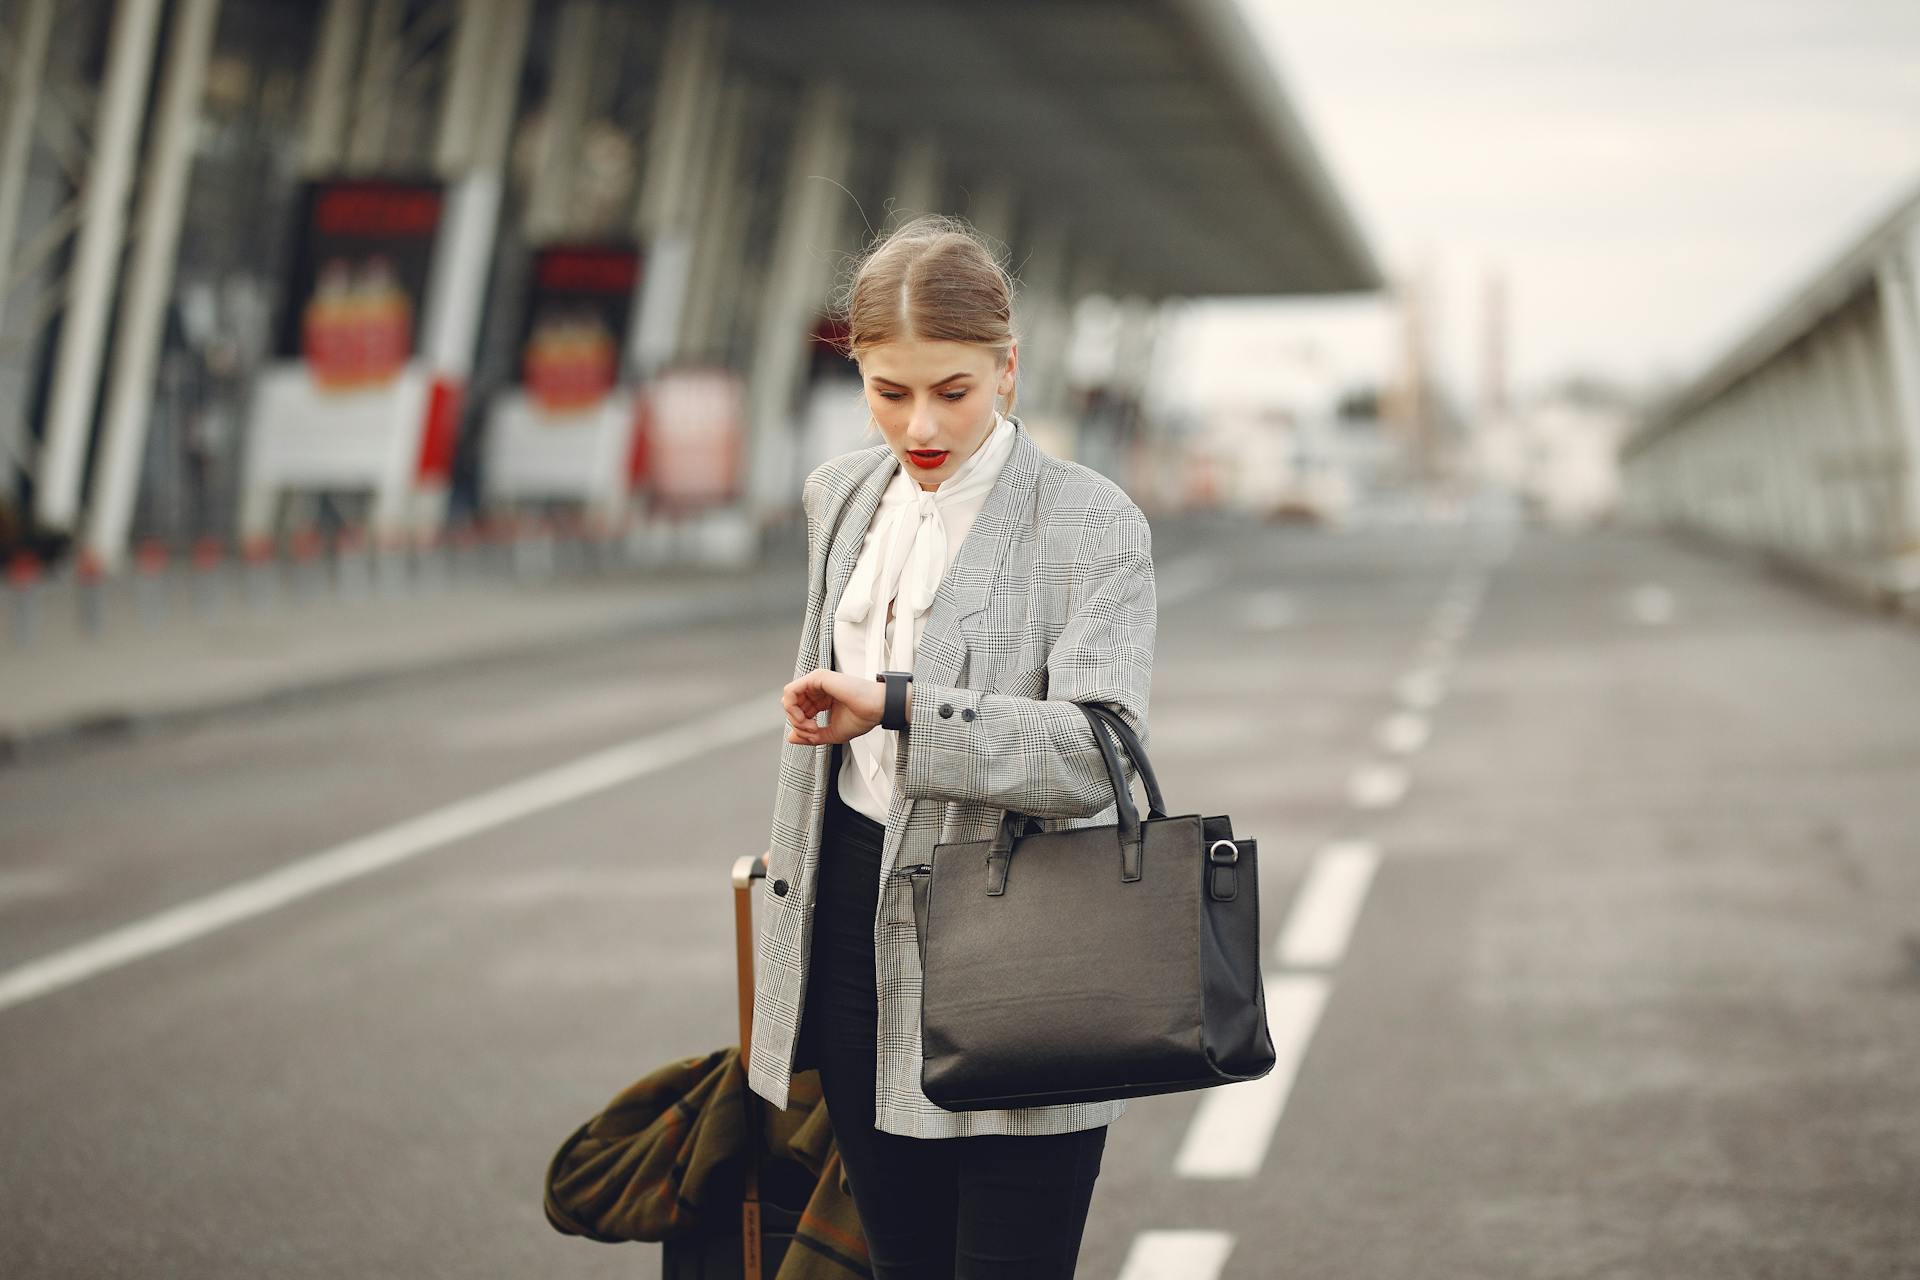 Worried young businesswoman with suitcase hurrying on flight on urban background